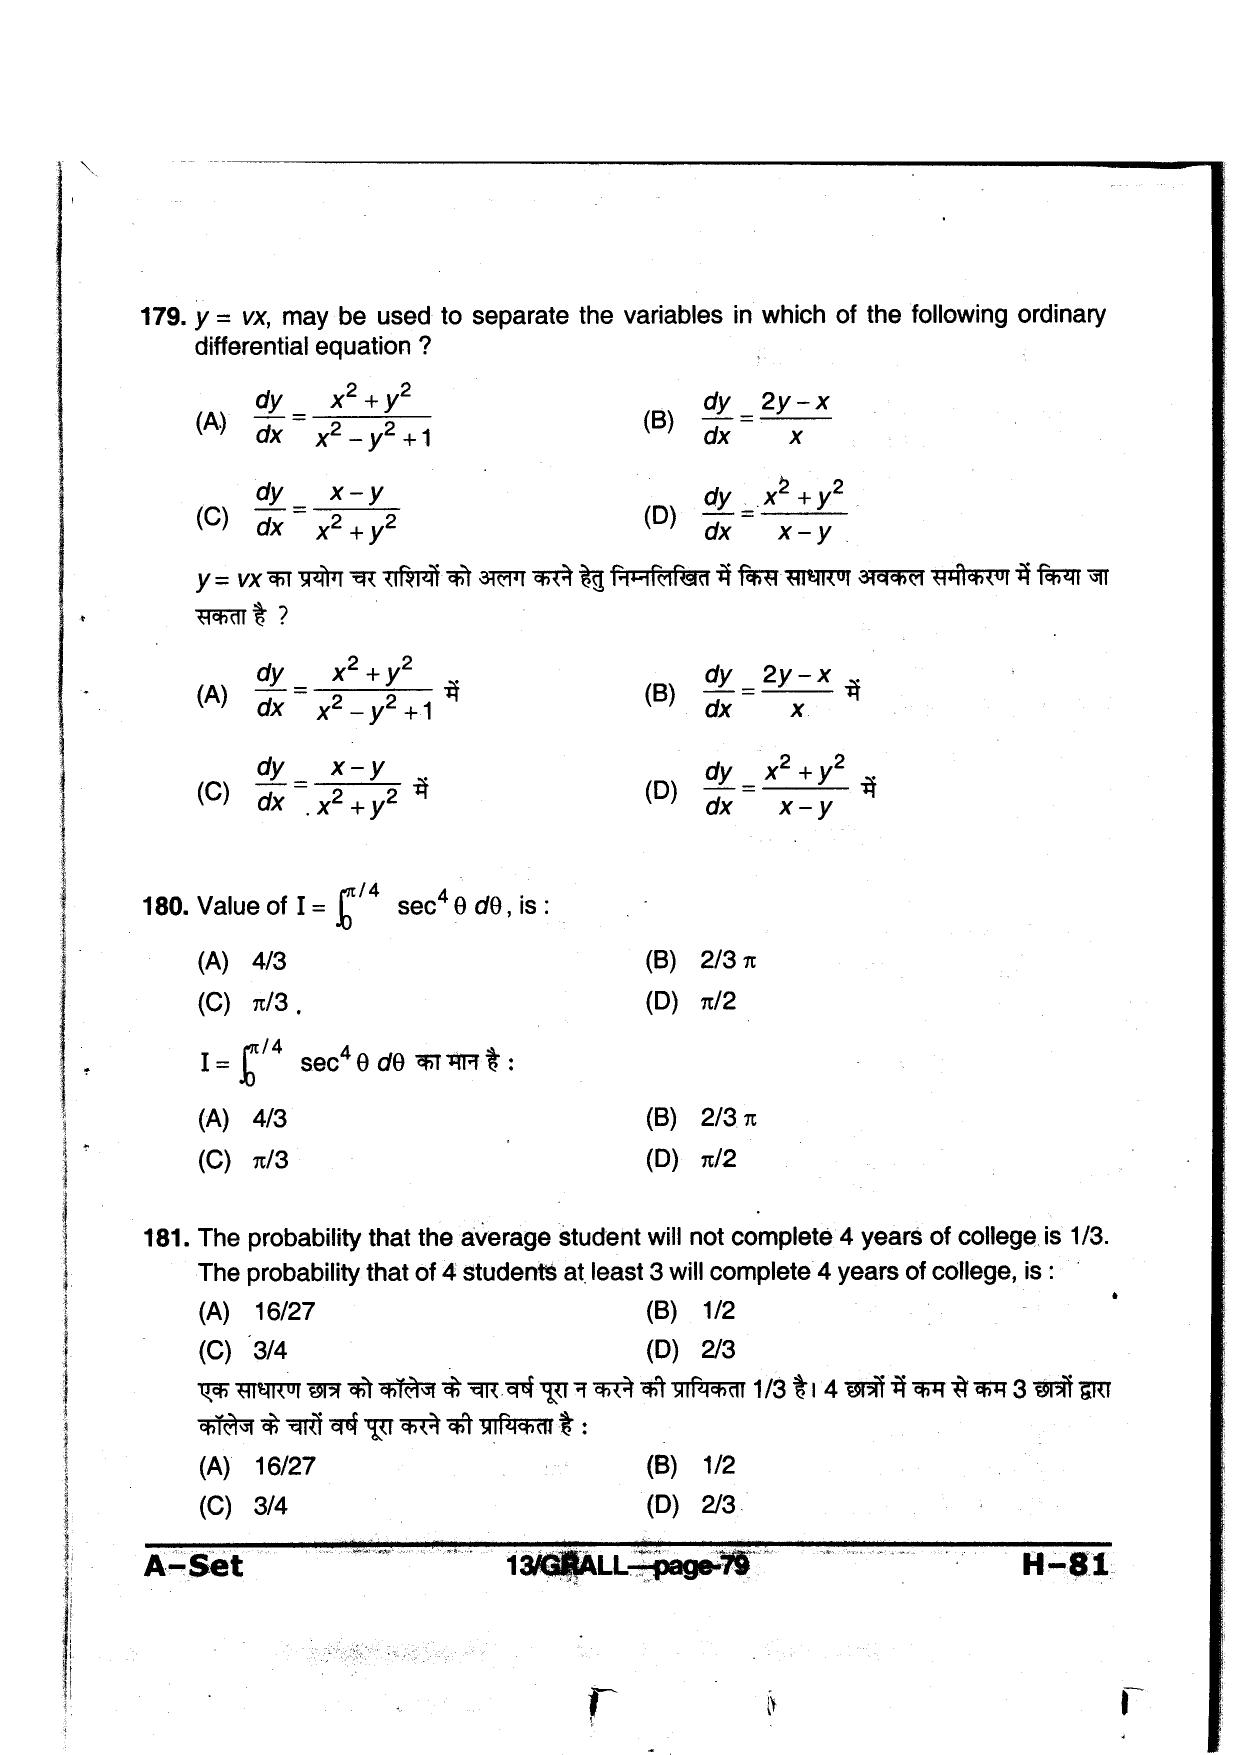 MP PAT 2013 Question Paper - Paper I - Page 79